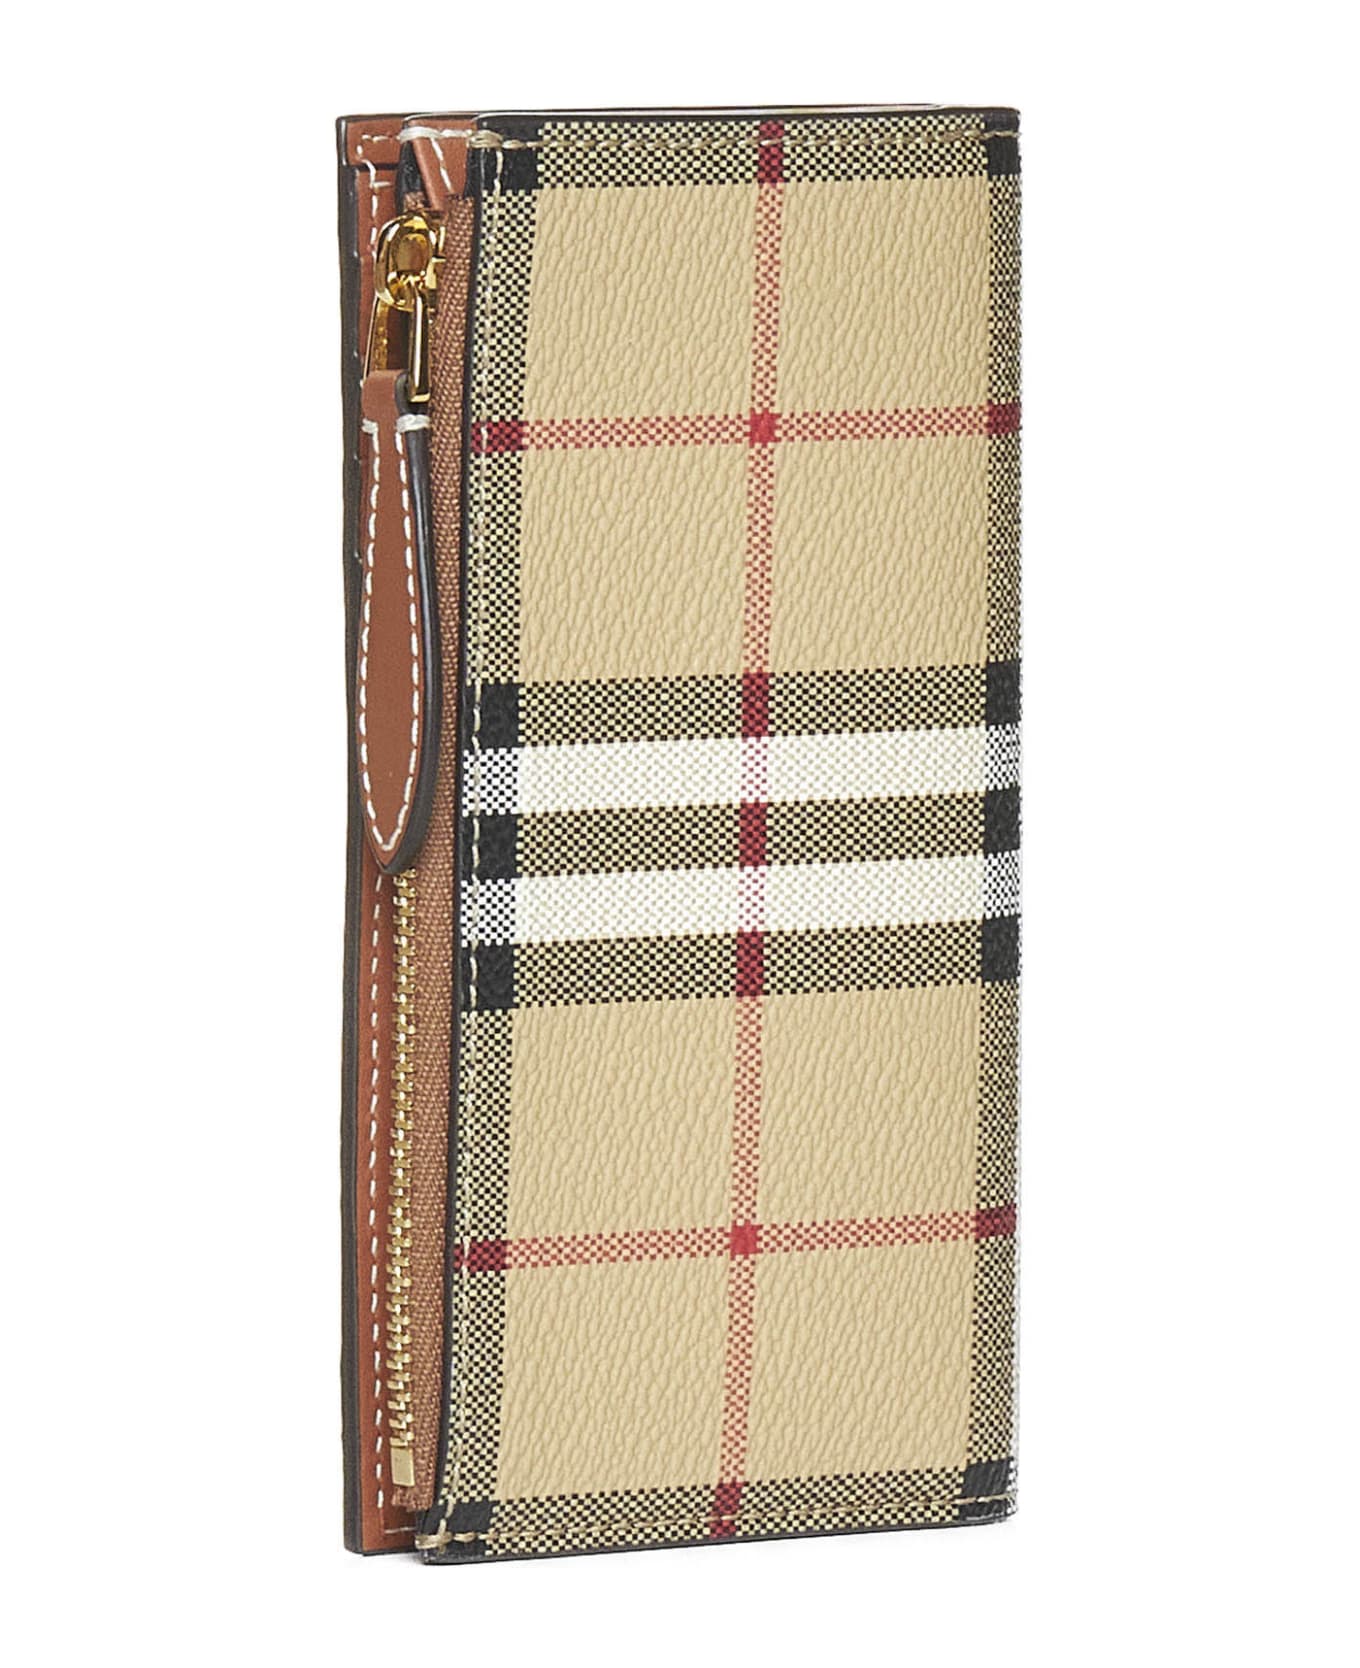 Burberry Check Pattern Zip-up Wallet - Archive beige